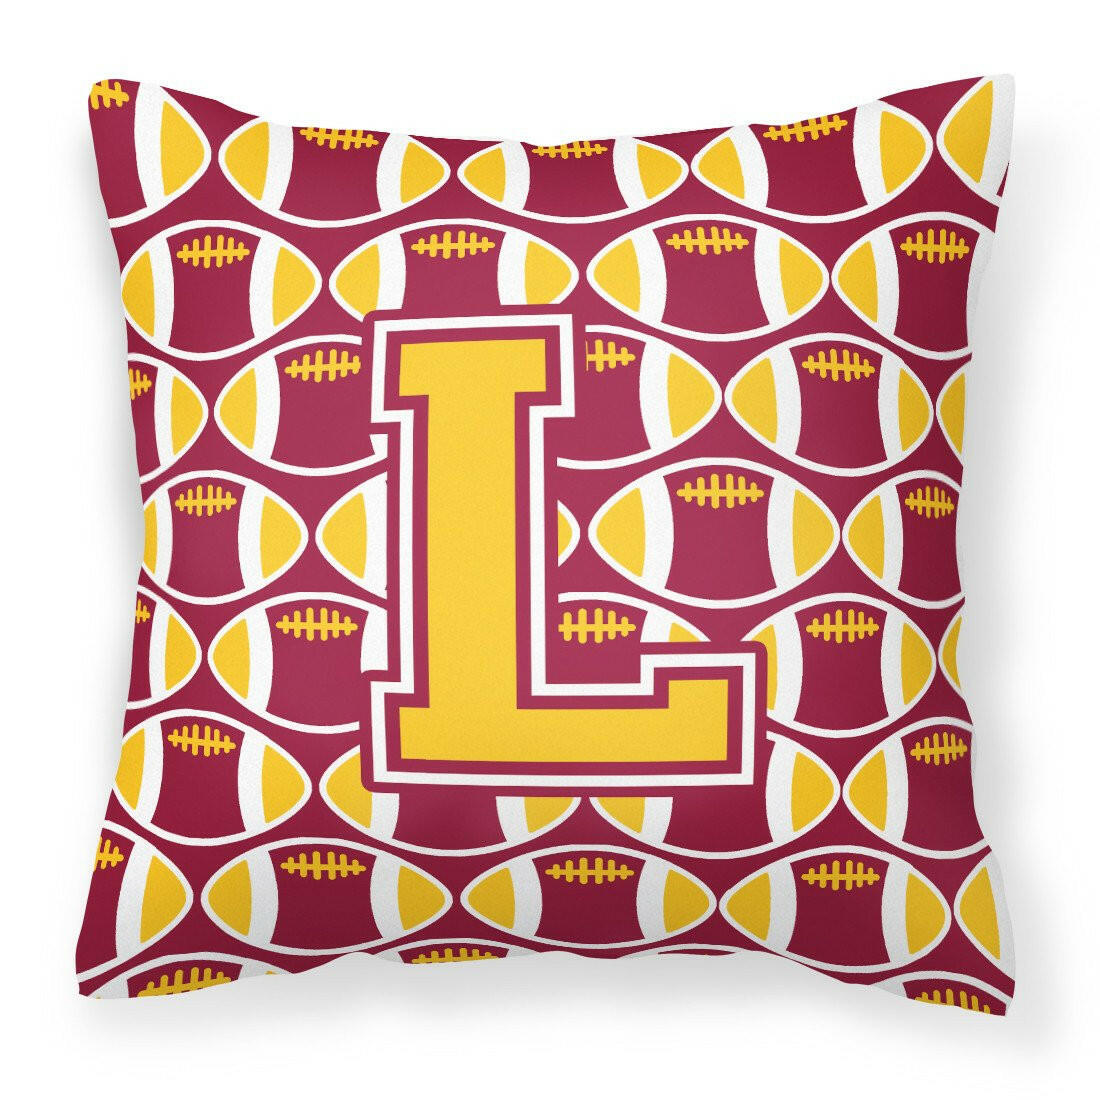 Letter L Football Maroon and Gold Fabric Decorative Pillow CJ1081-LPW1414 by Caroline's Treasures